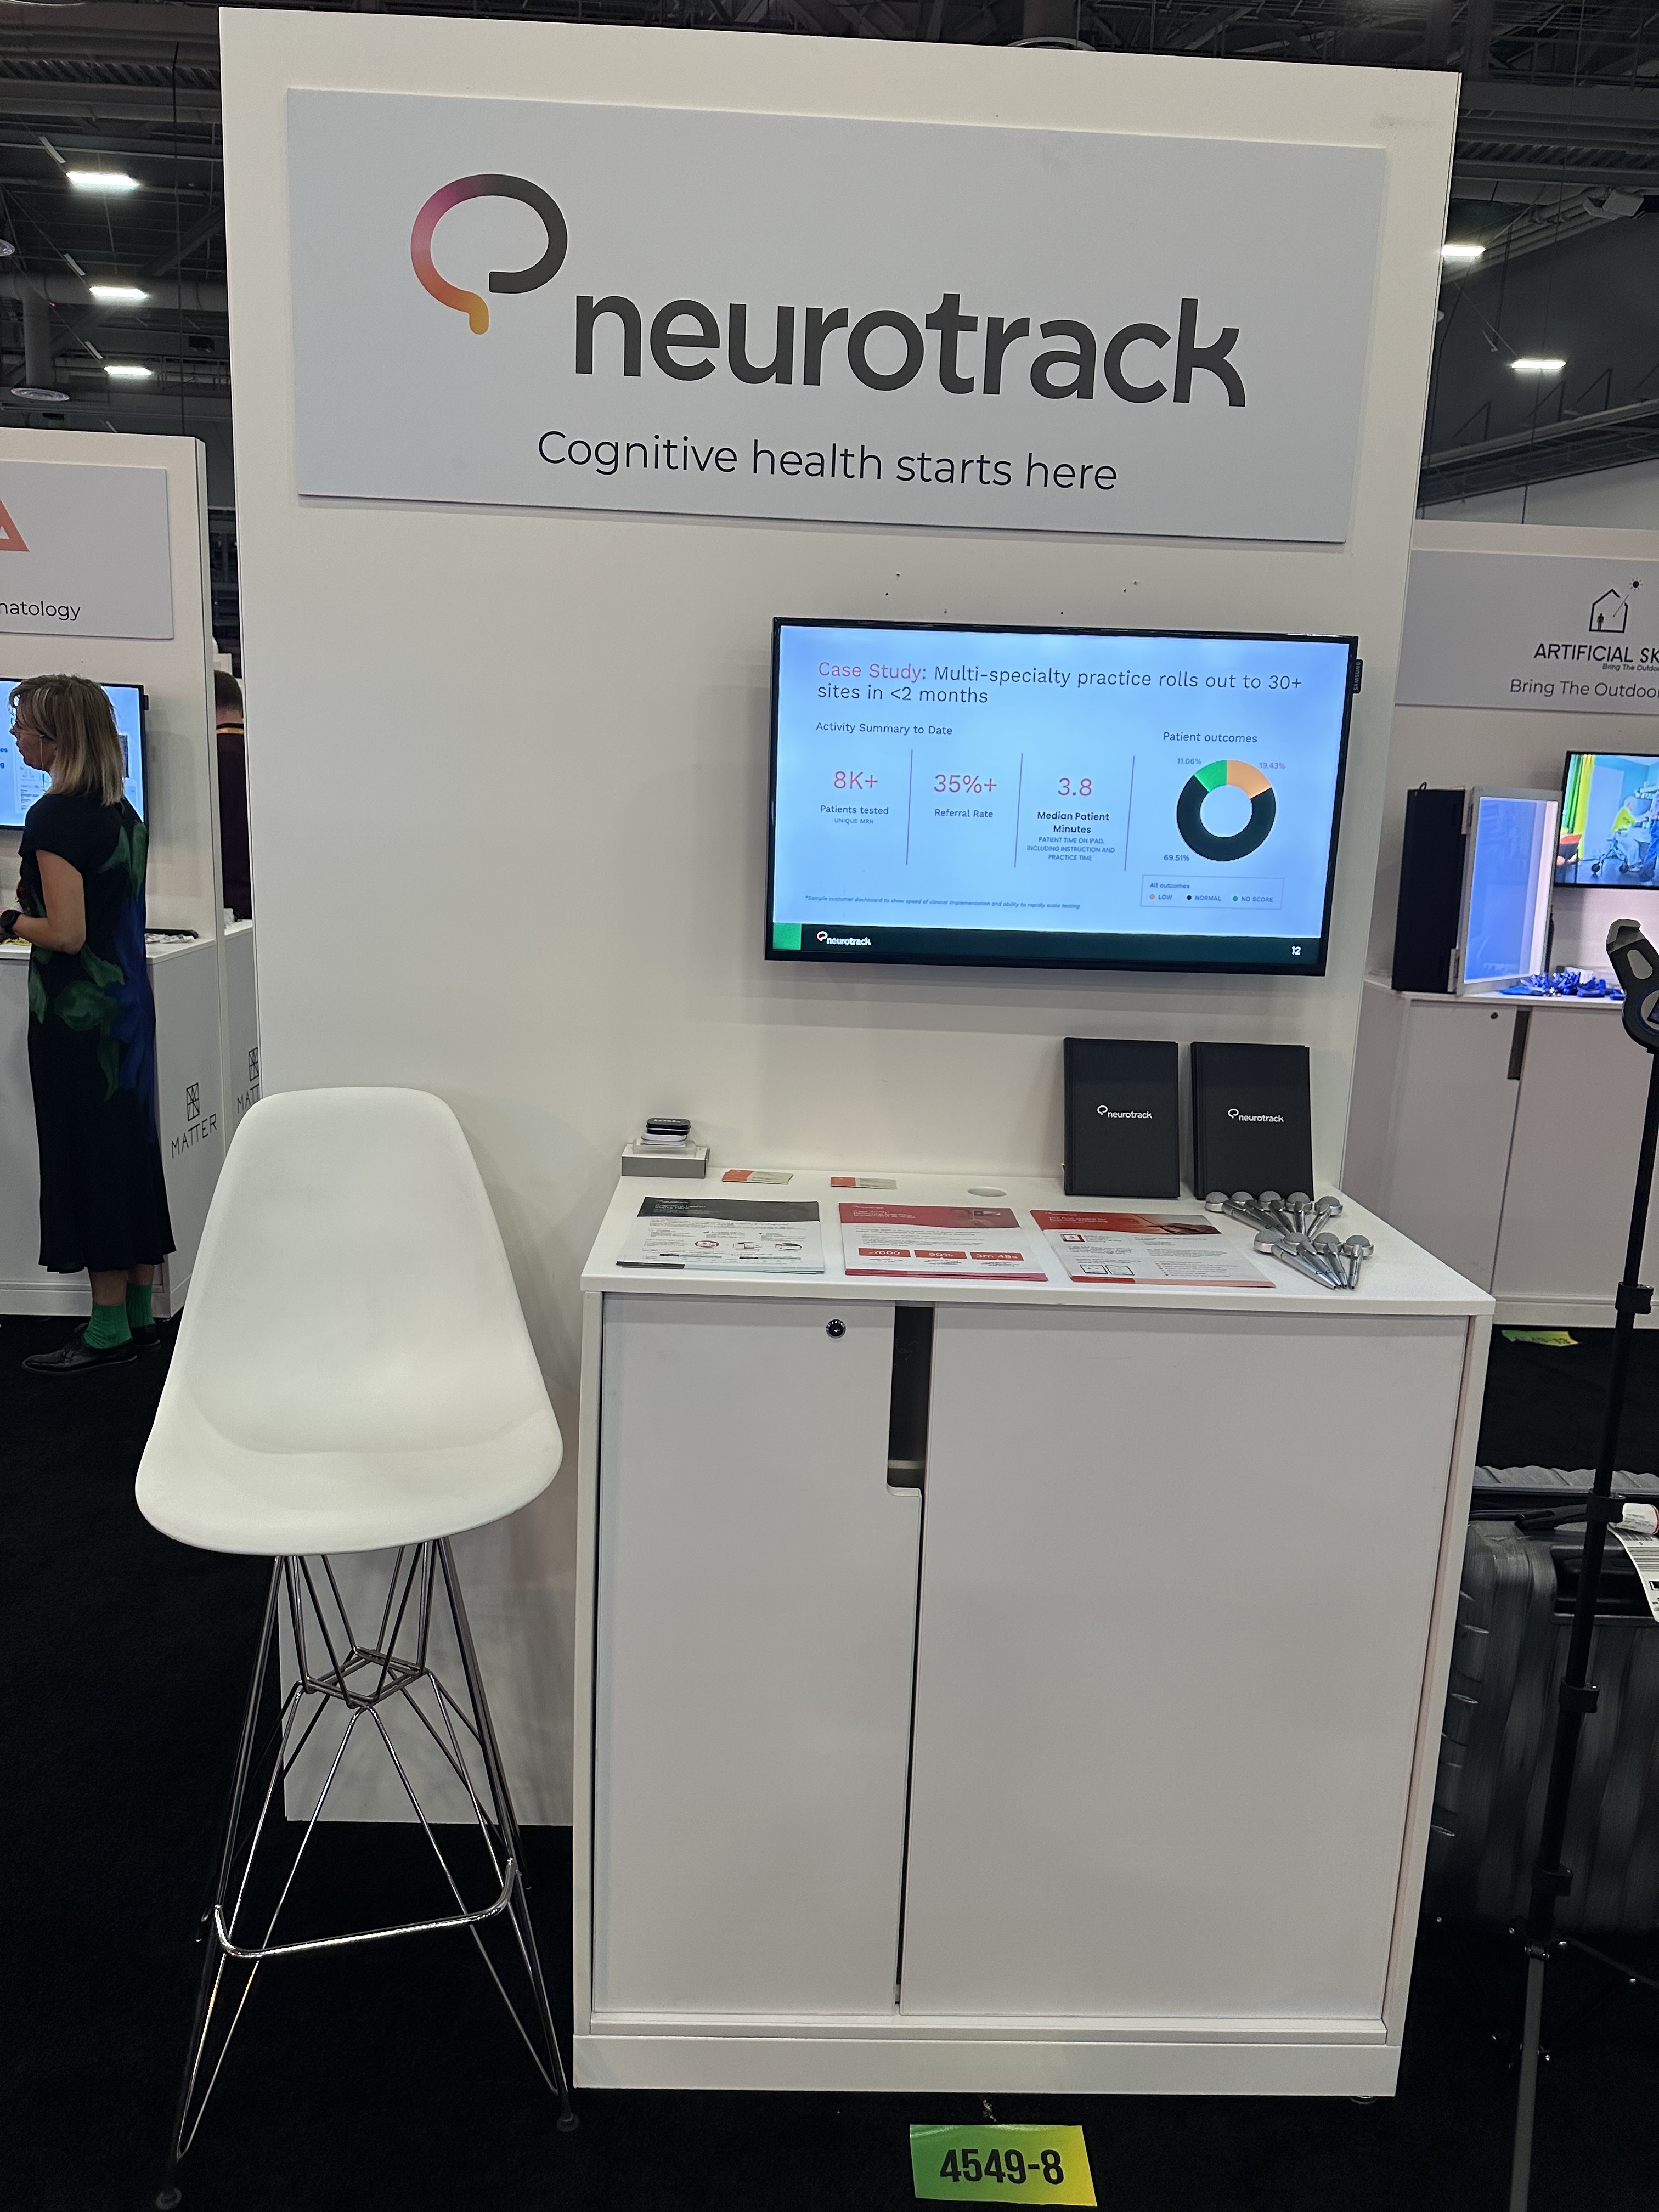 My timing was off visiting the Neurotrack booth...